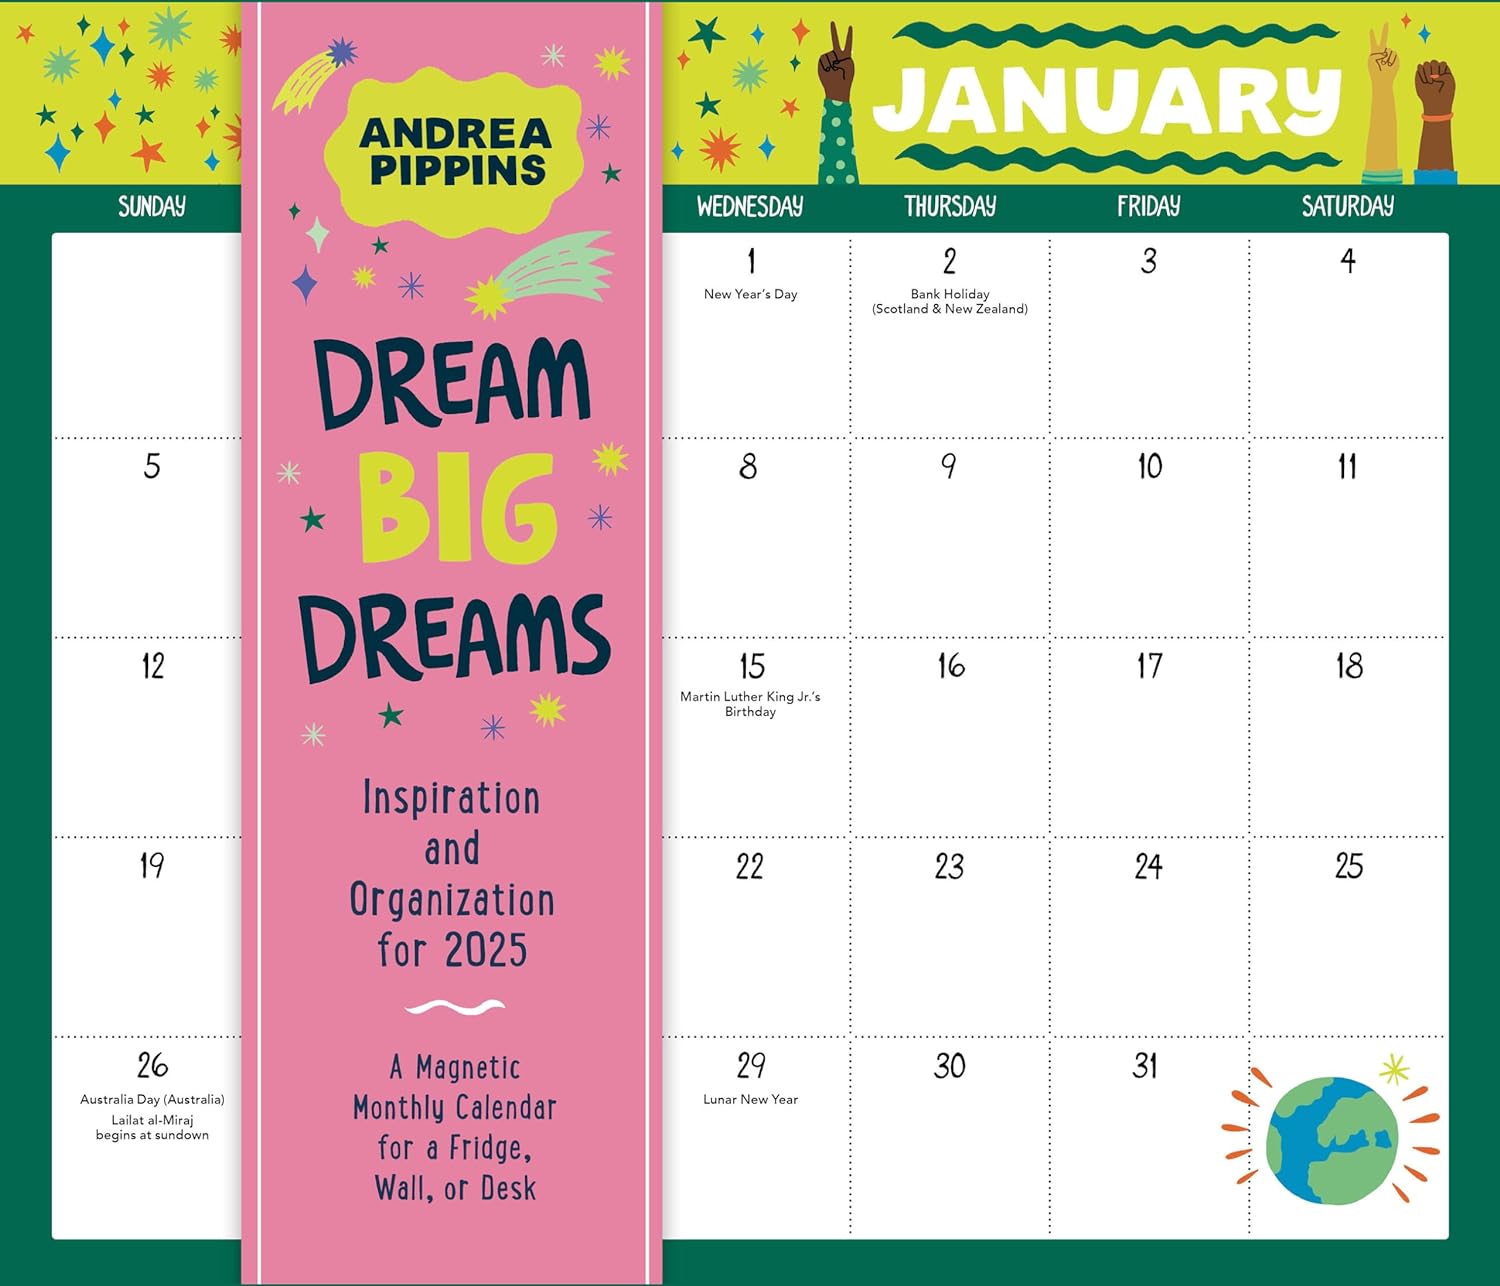 2025 Dream Big Dreams: Inspiration and Organization - Monthly Magnetic Pad Calendar